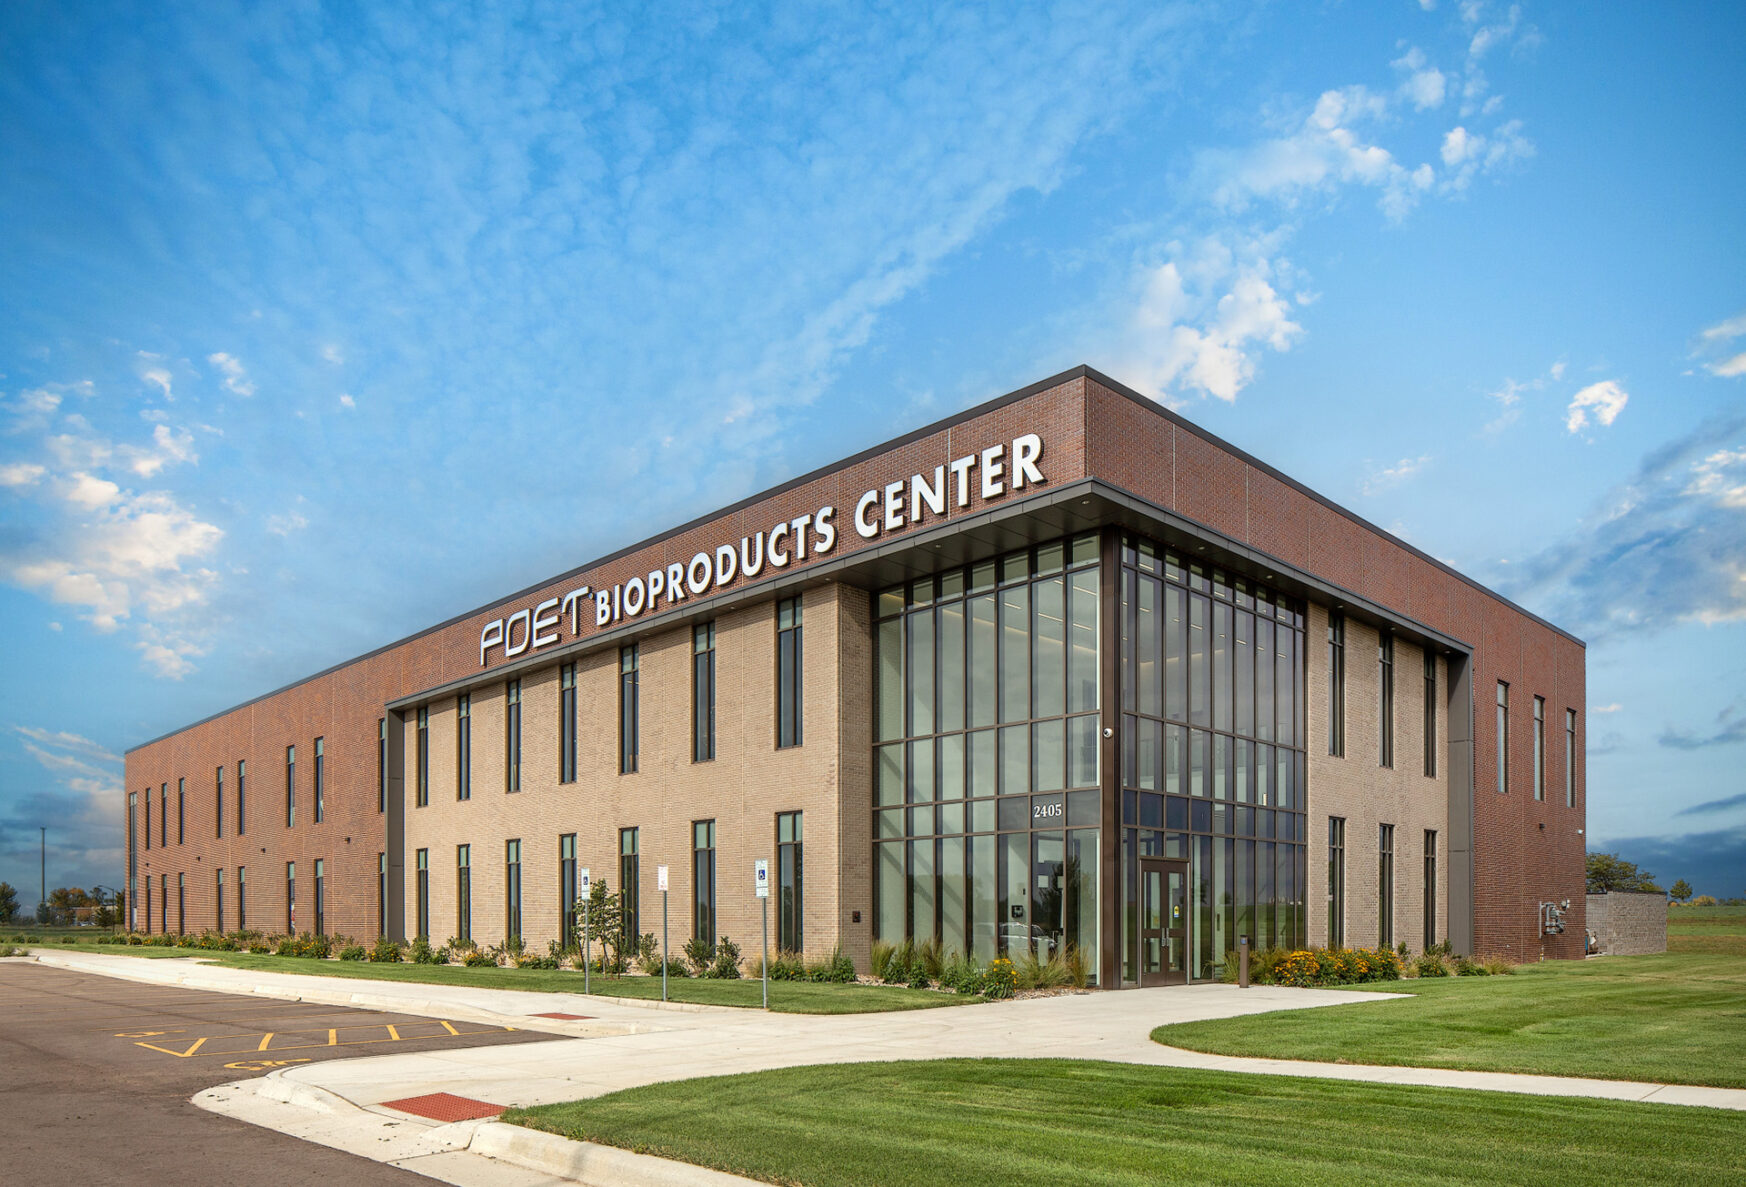 POET Bioproducts Institute at South Dakota State University built by McCownGordon Construction